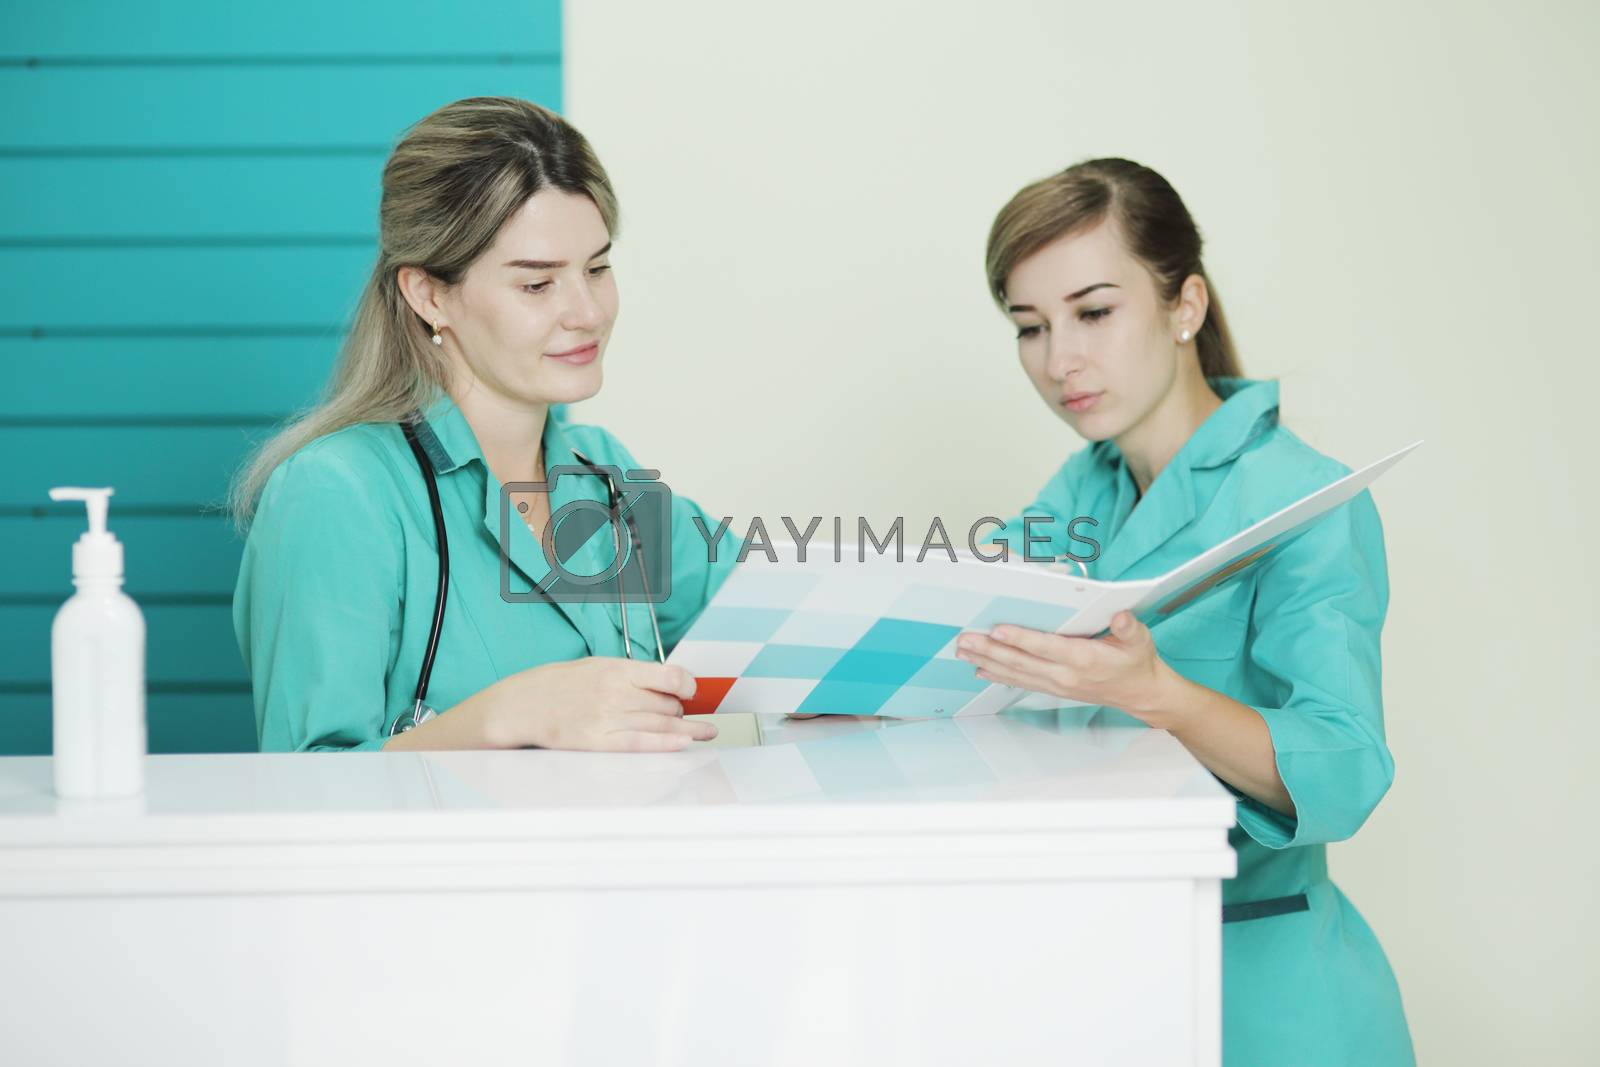 Royalty free image of Two female doctor or nurse discussing patient treatment. Stethoscope on the neck by selinsmo